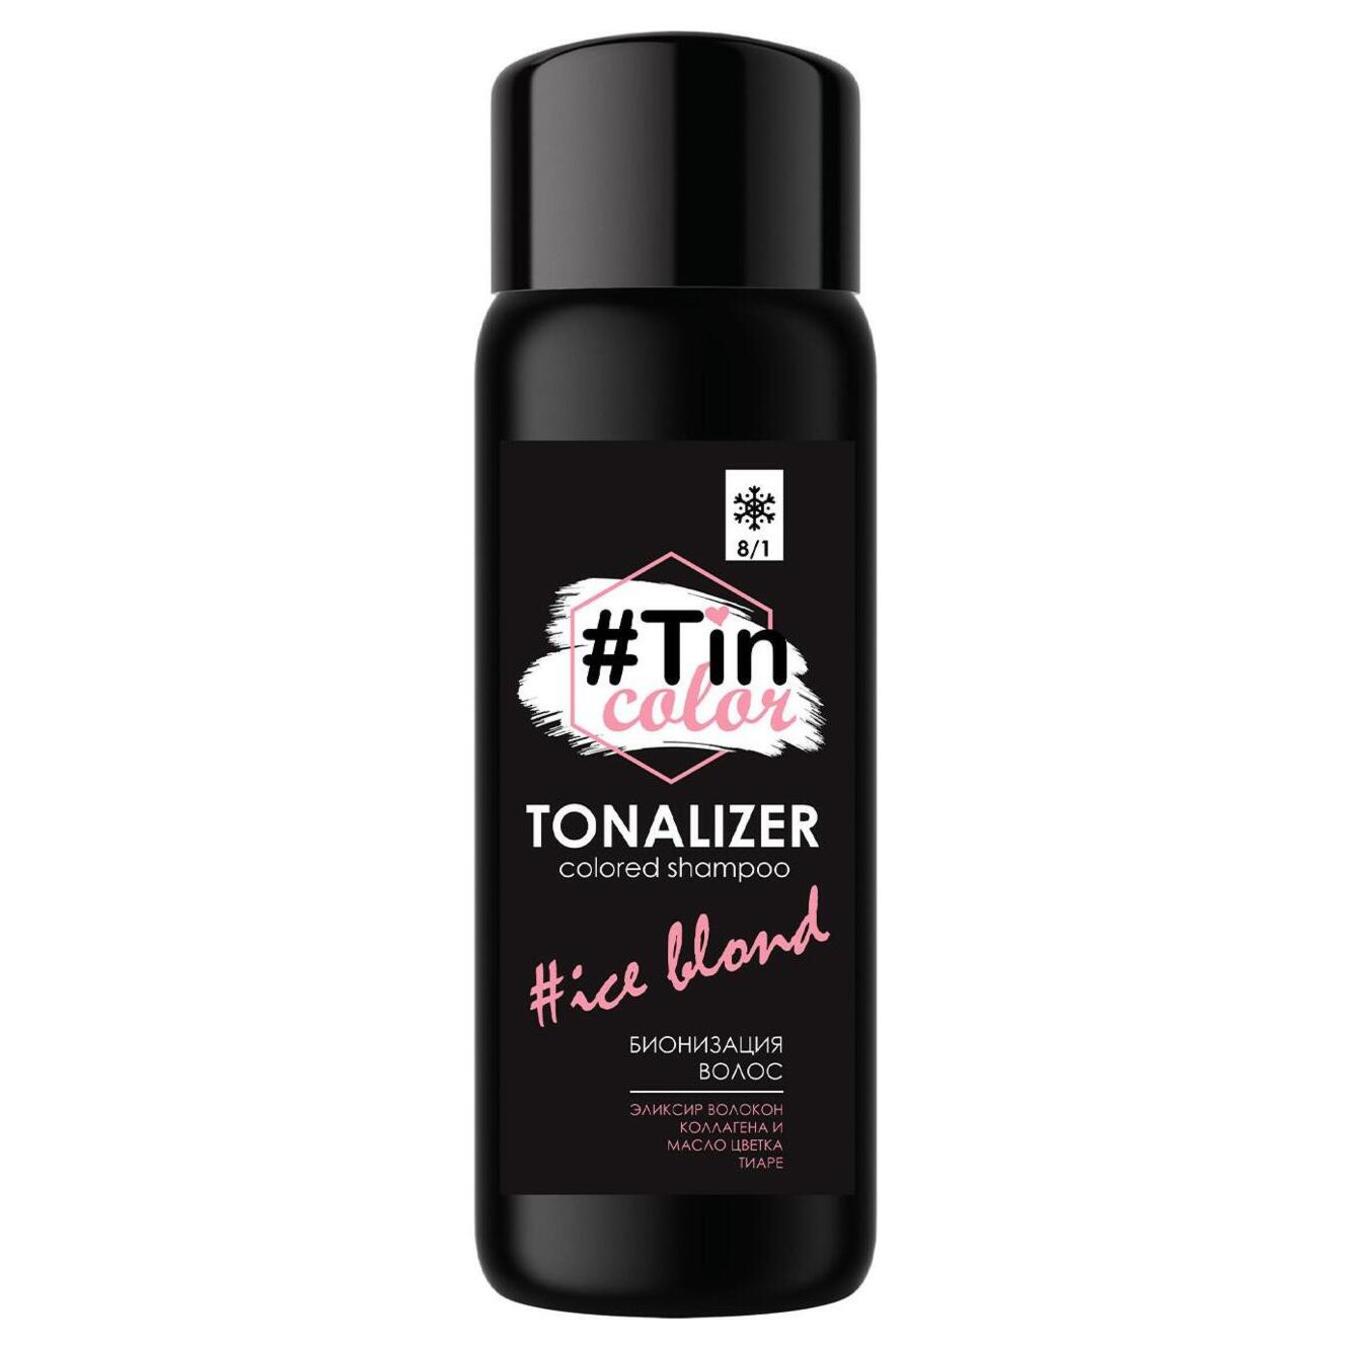 Tonalizer Color for hair frosty blonde 8/1 Tin 60ml